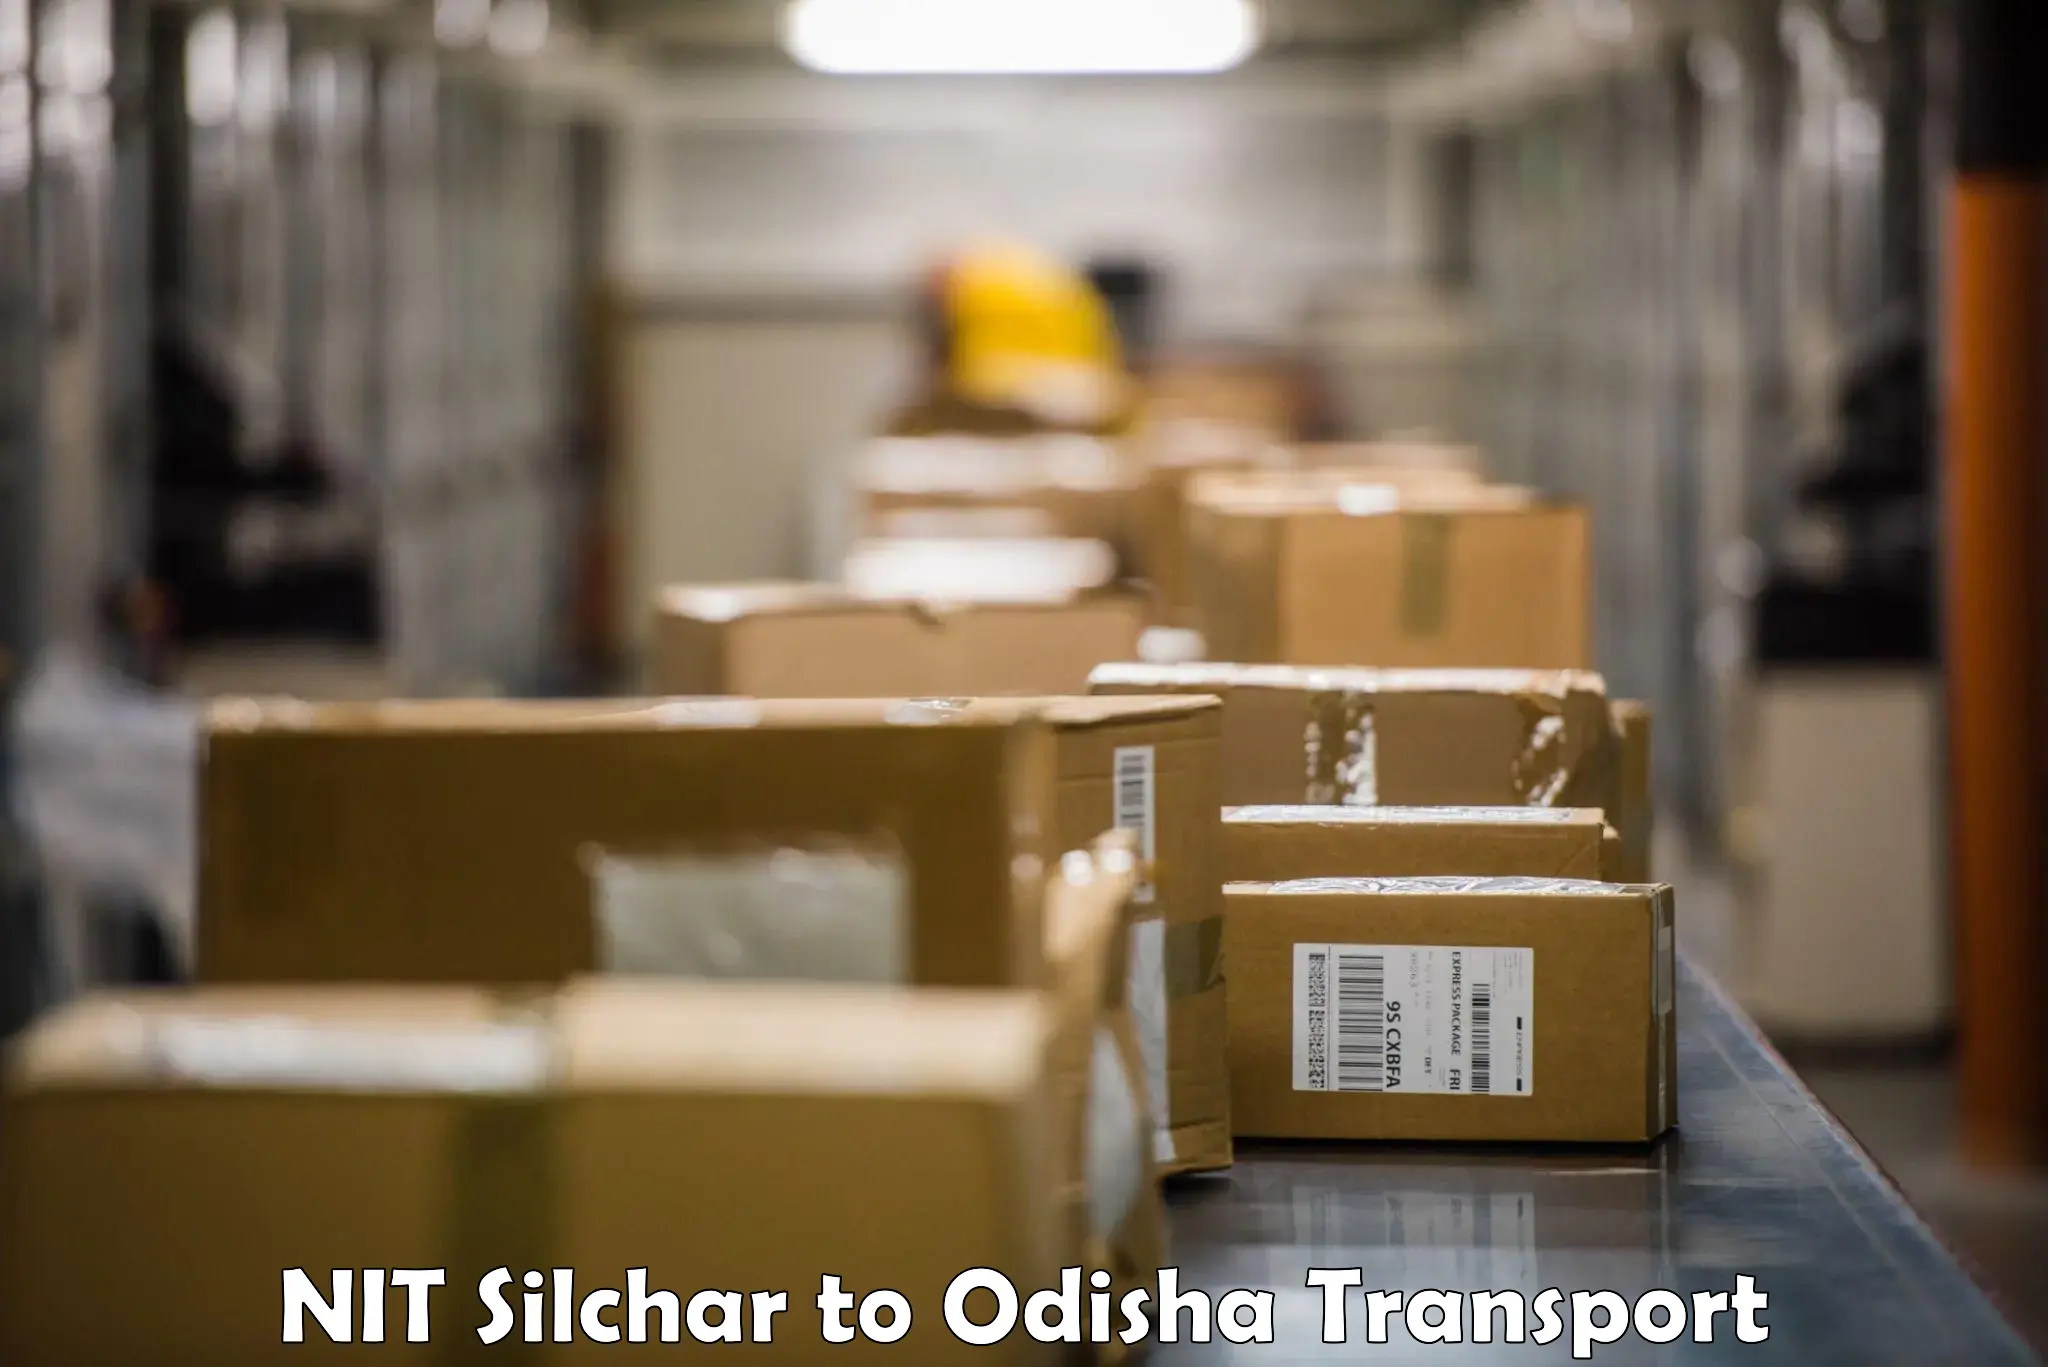 Vehicle transport services in NIT Silchar to Cuttack